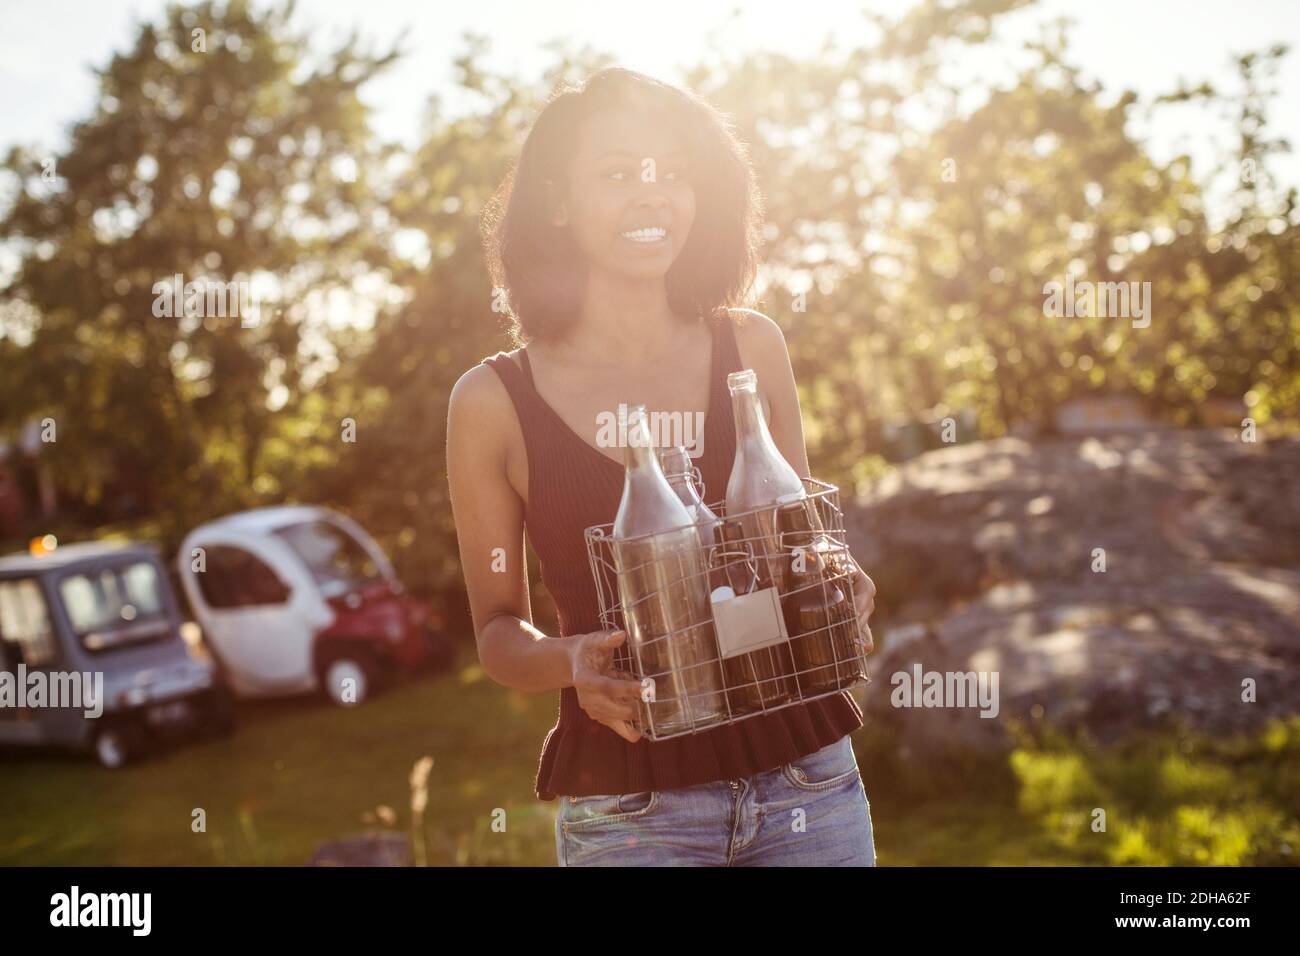 Tilt shot of smiling young woman holding bottles while standing against trees Stock Photo